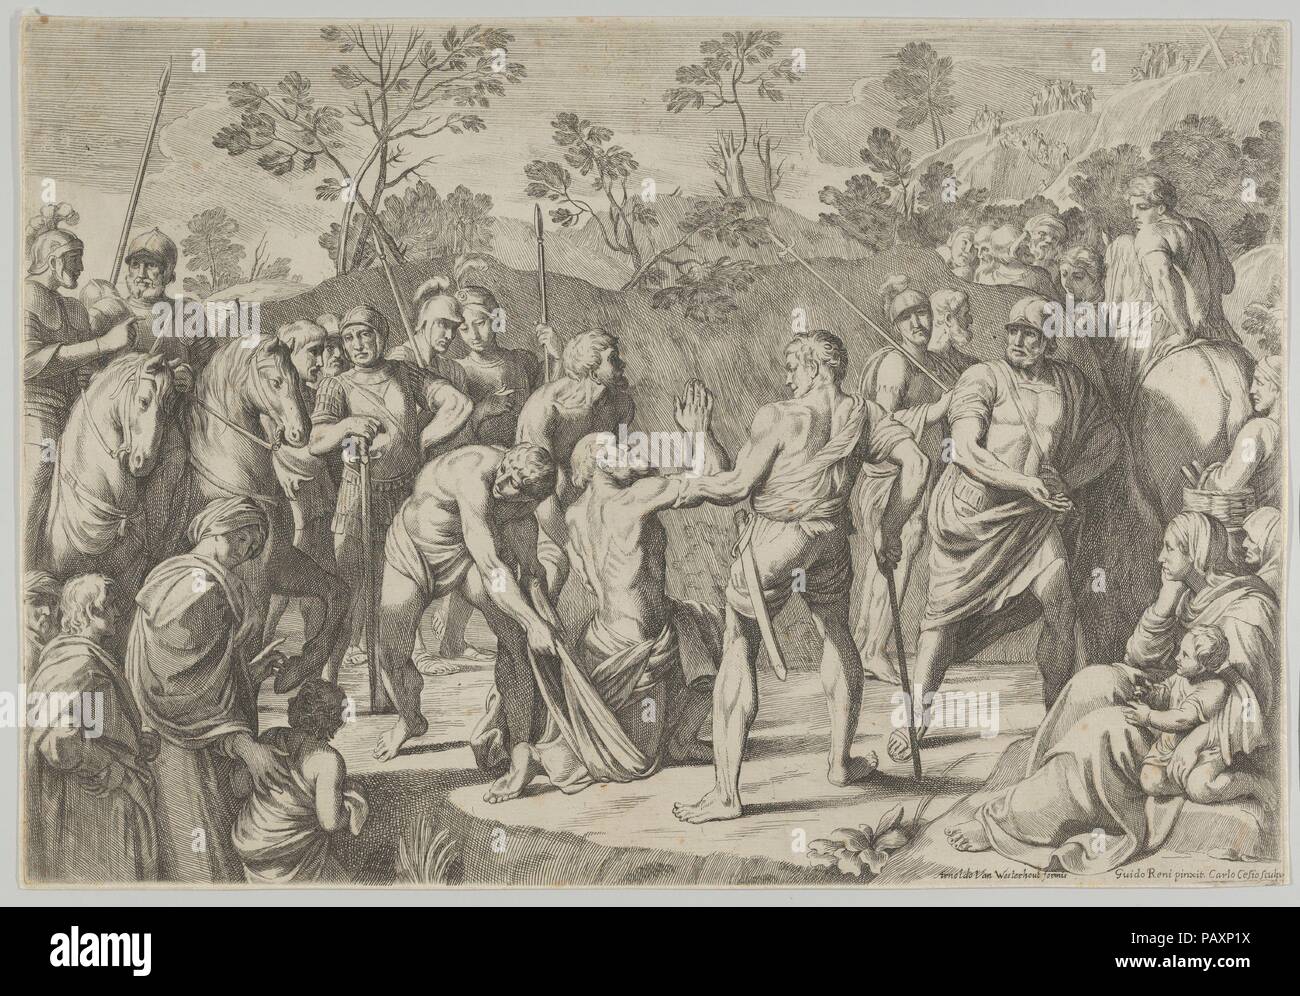 Saint Andrew kneeling in prayer as he is led to the cross, after Reni. Artist: After Guido Reni (Italian, Bologna 1575-1642 Bologna); Engraved by Carlo Cesi (Italian, Antrodoco ca. 1622-1682 Rieti). Dimensions: Sheet (Trimmed): 11 7/8 × 17 1/4 in. (30.1 × 43.8 cm). Publisher: Arnold van Westerhout (Flemish, Antwerp 1651-1725 Rome). Date: 1650-80.  After a fresco by Reni in the church of San Gregorio Magno in Rome. Museum: Metropolitan Museum of Art, New York, USA. Stock Photo